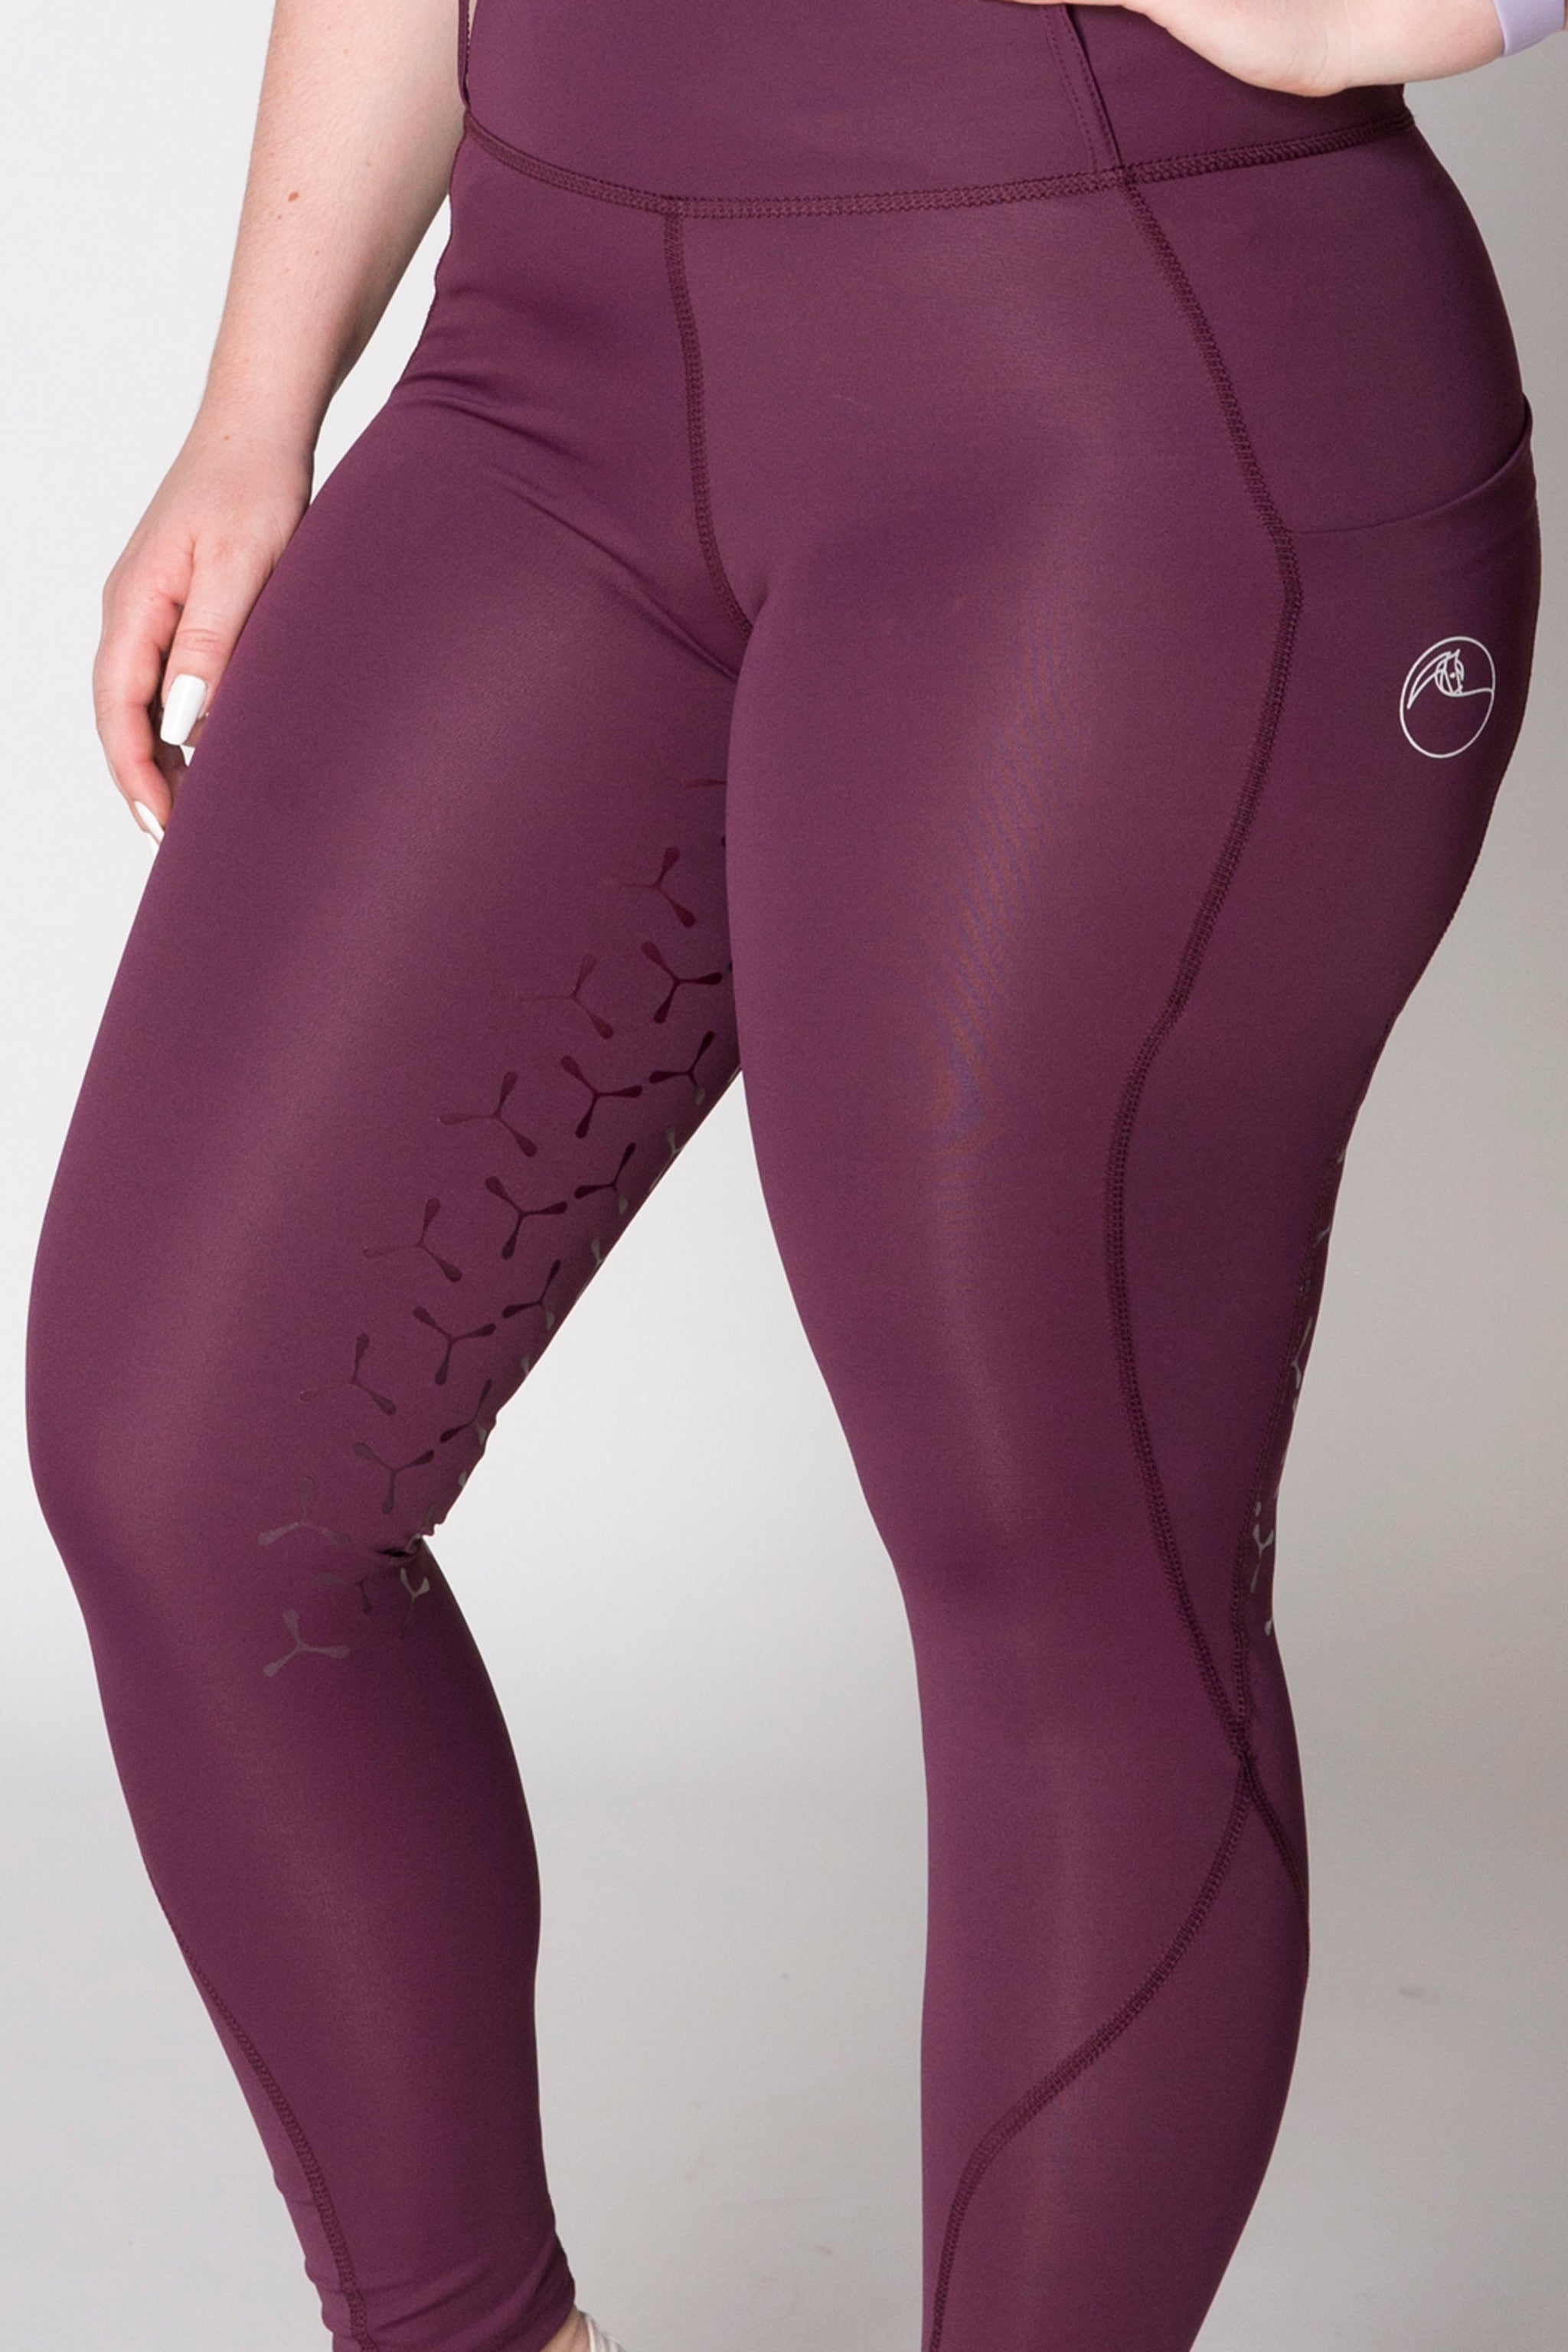 Double Pocket Full Seat Riding Tights - excelequine